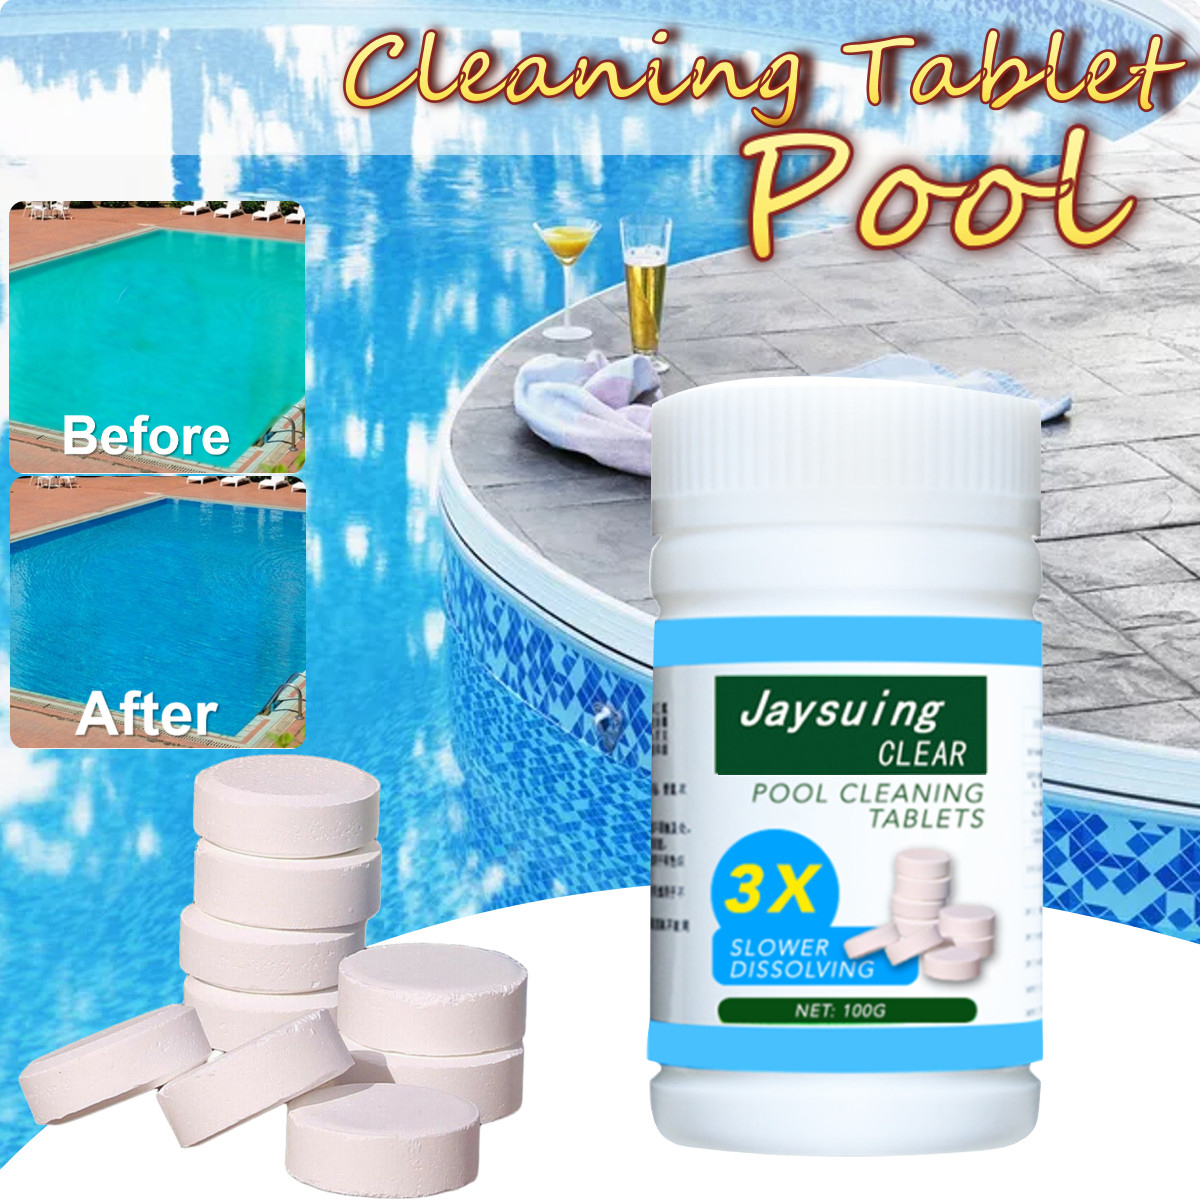 100-Pcs-Swimming-Pool-Chlorine-Tablets-High-Content-Chlorine-Effervescent-Sanitizing-Tablet-Cleaning-1727006-1